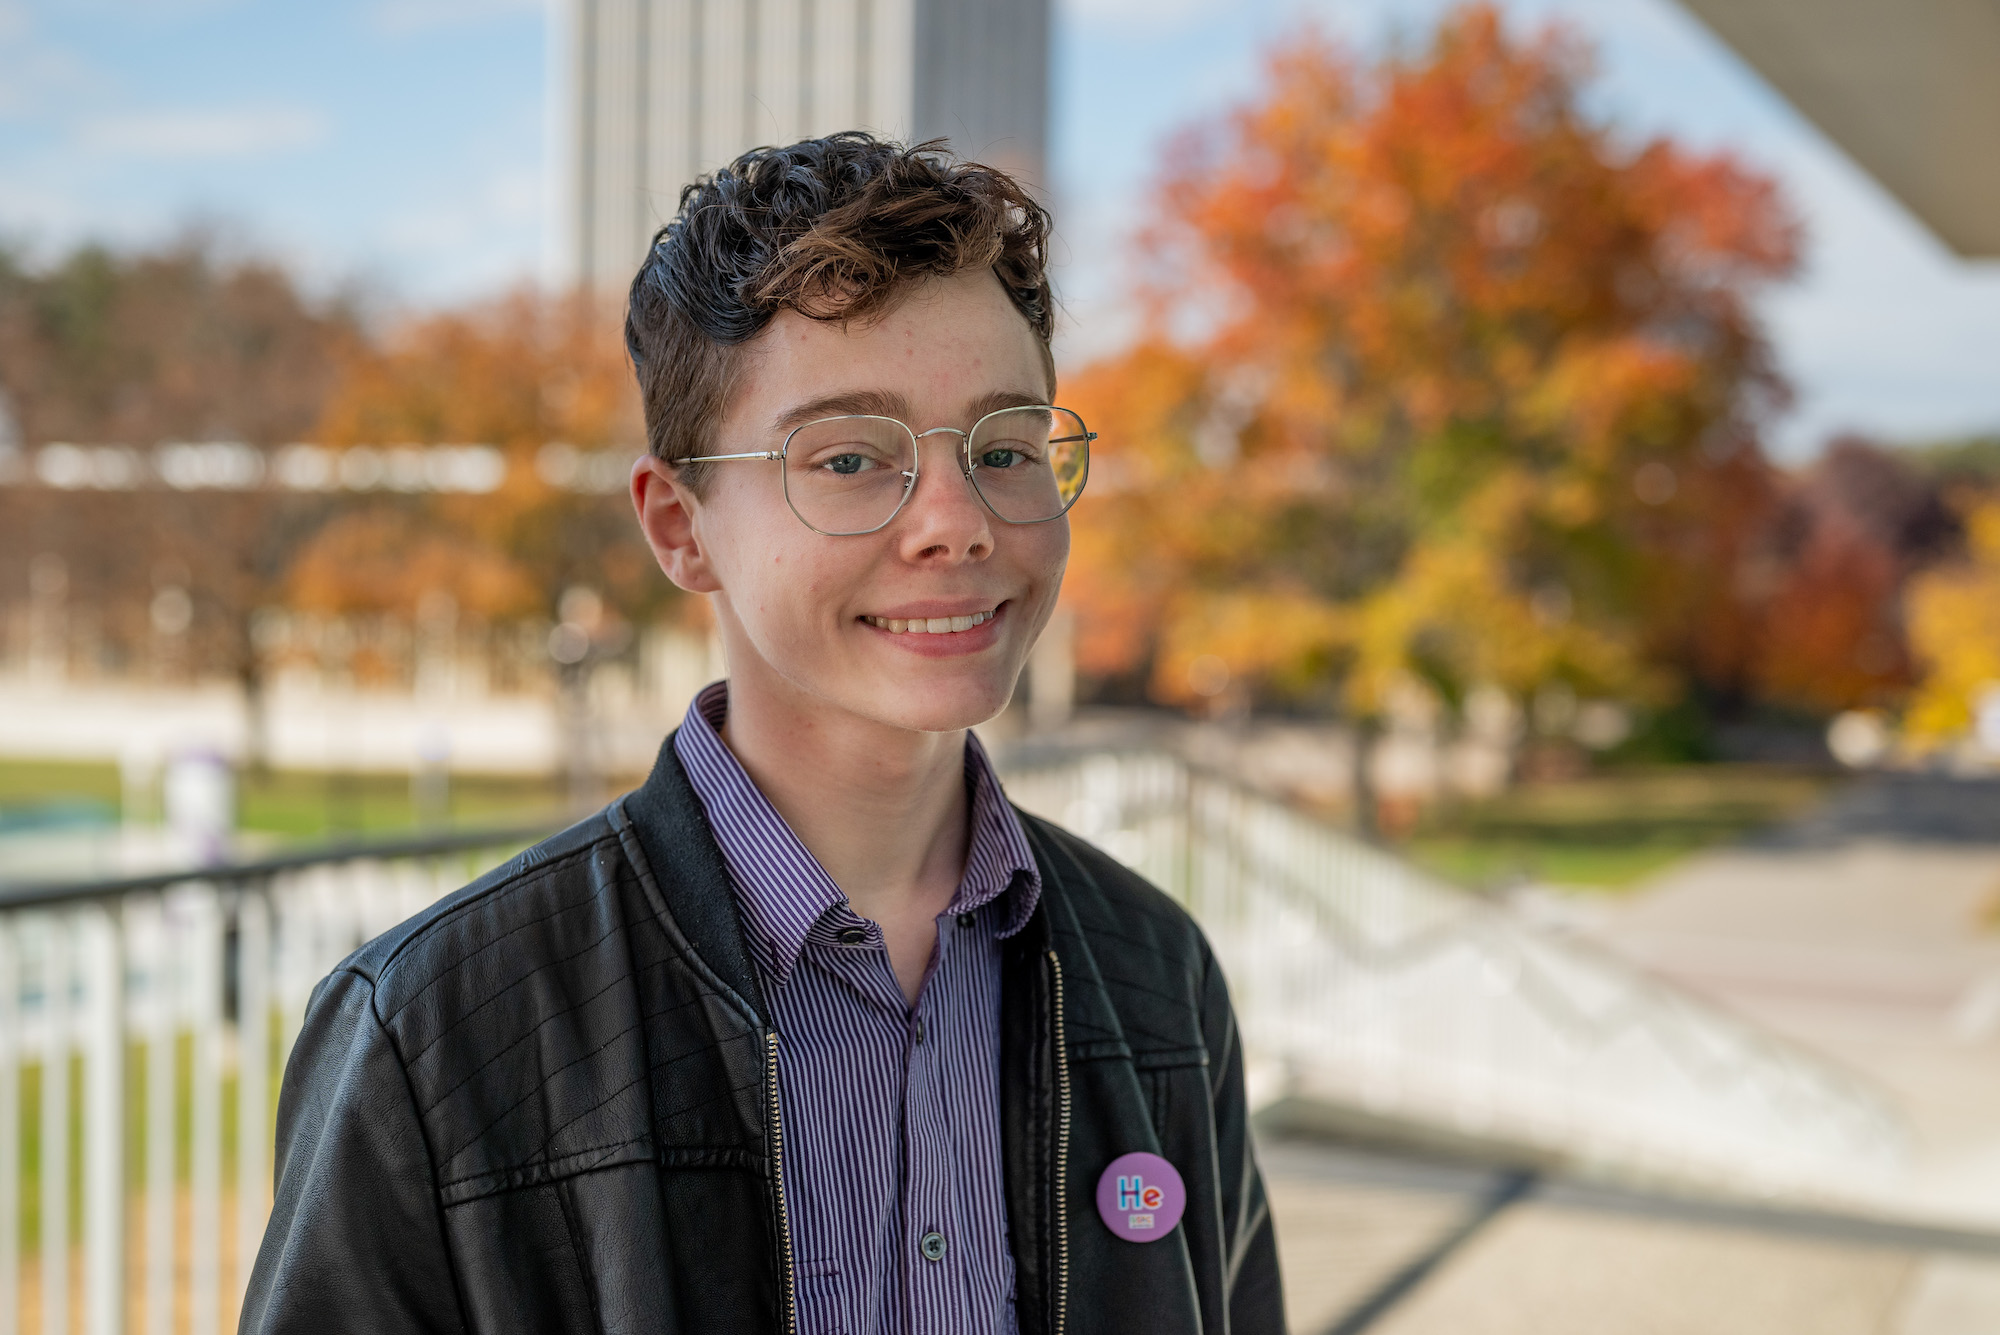 A young person with short curly hair and glasses wears a leather jacket and striped shirt and smiles for a portrait on the UAlbany campus. Fall foliage can be seen in the background.